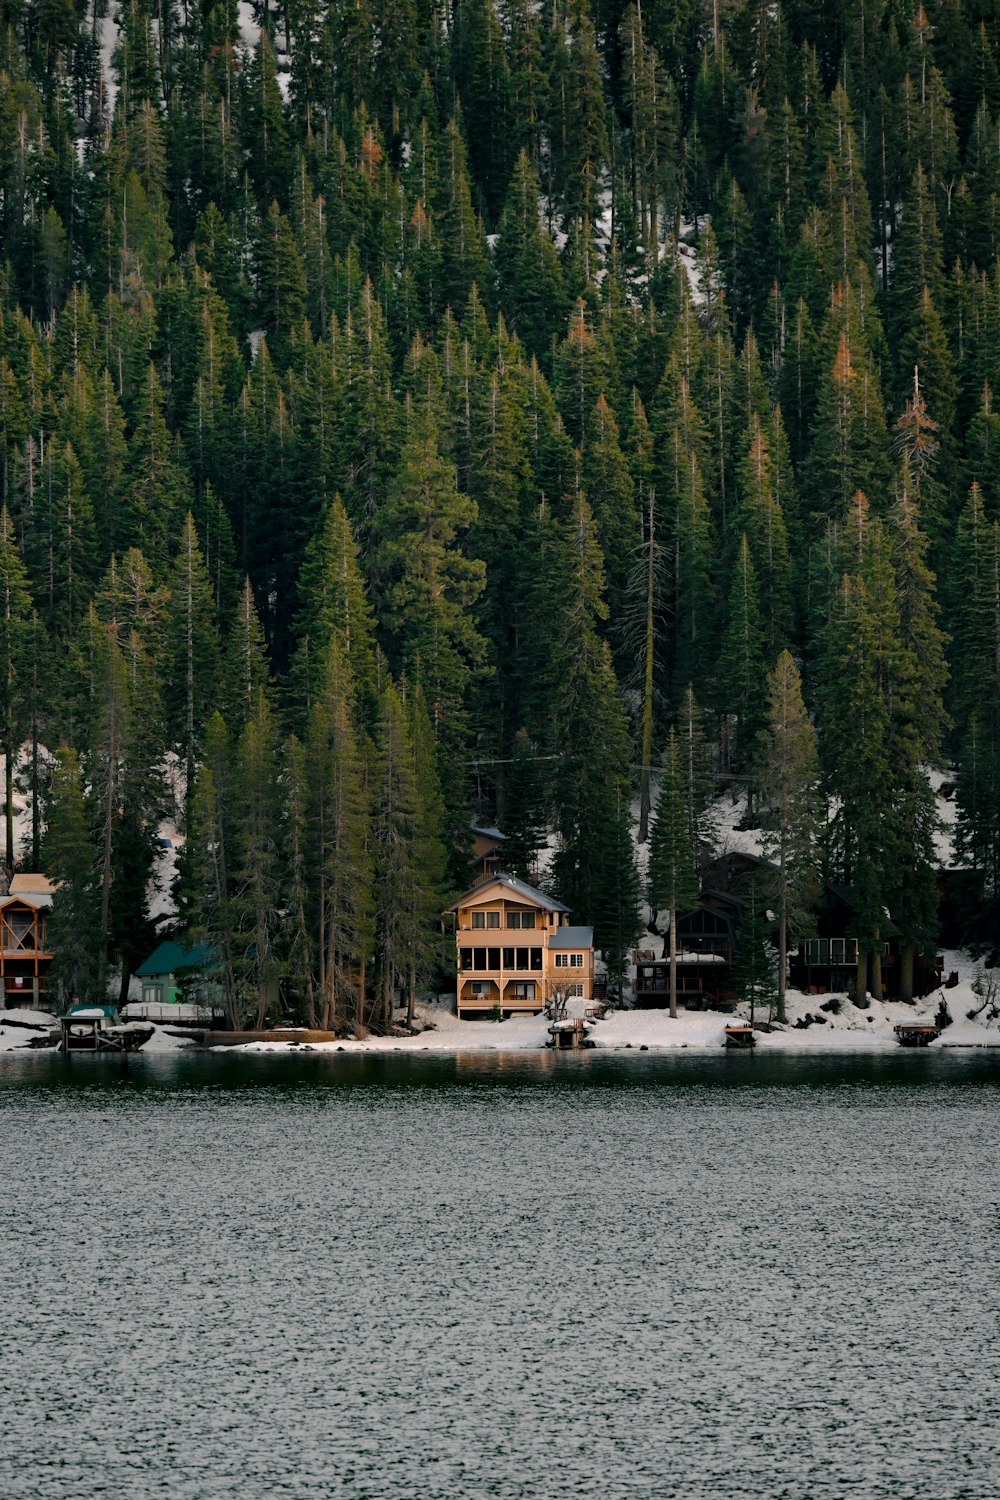 a house on a hill by a lake with trees